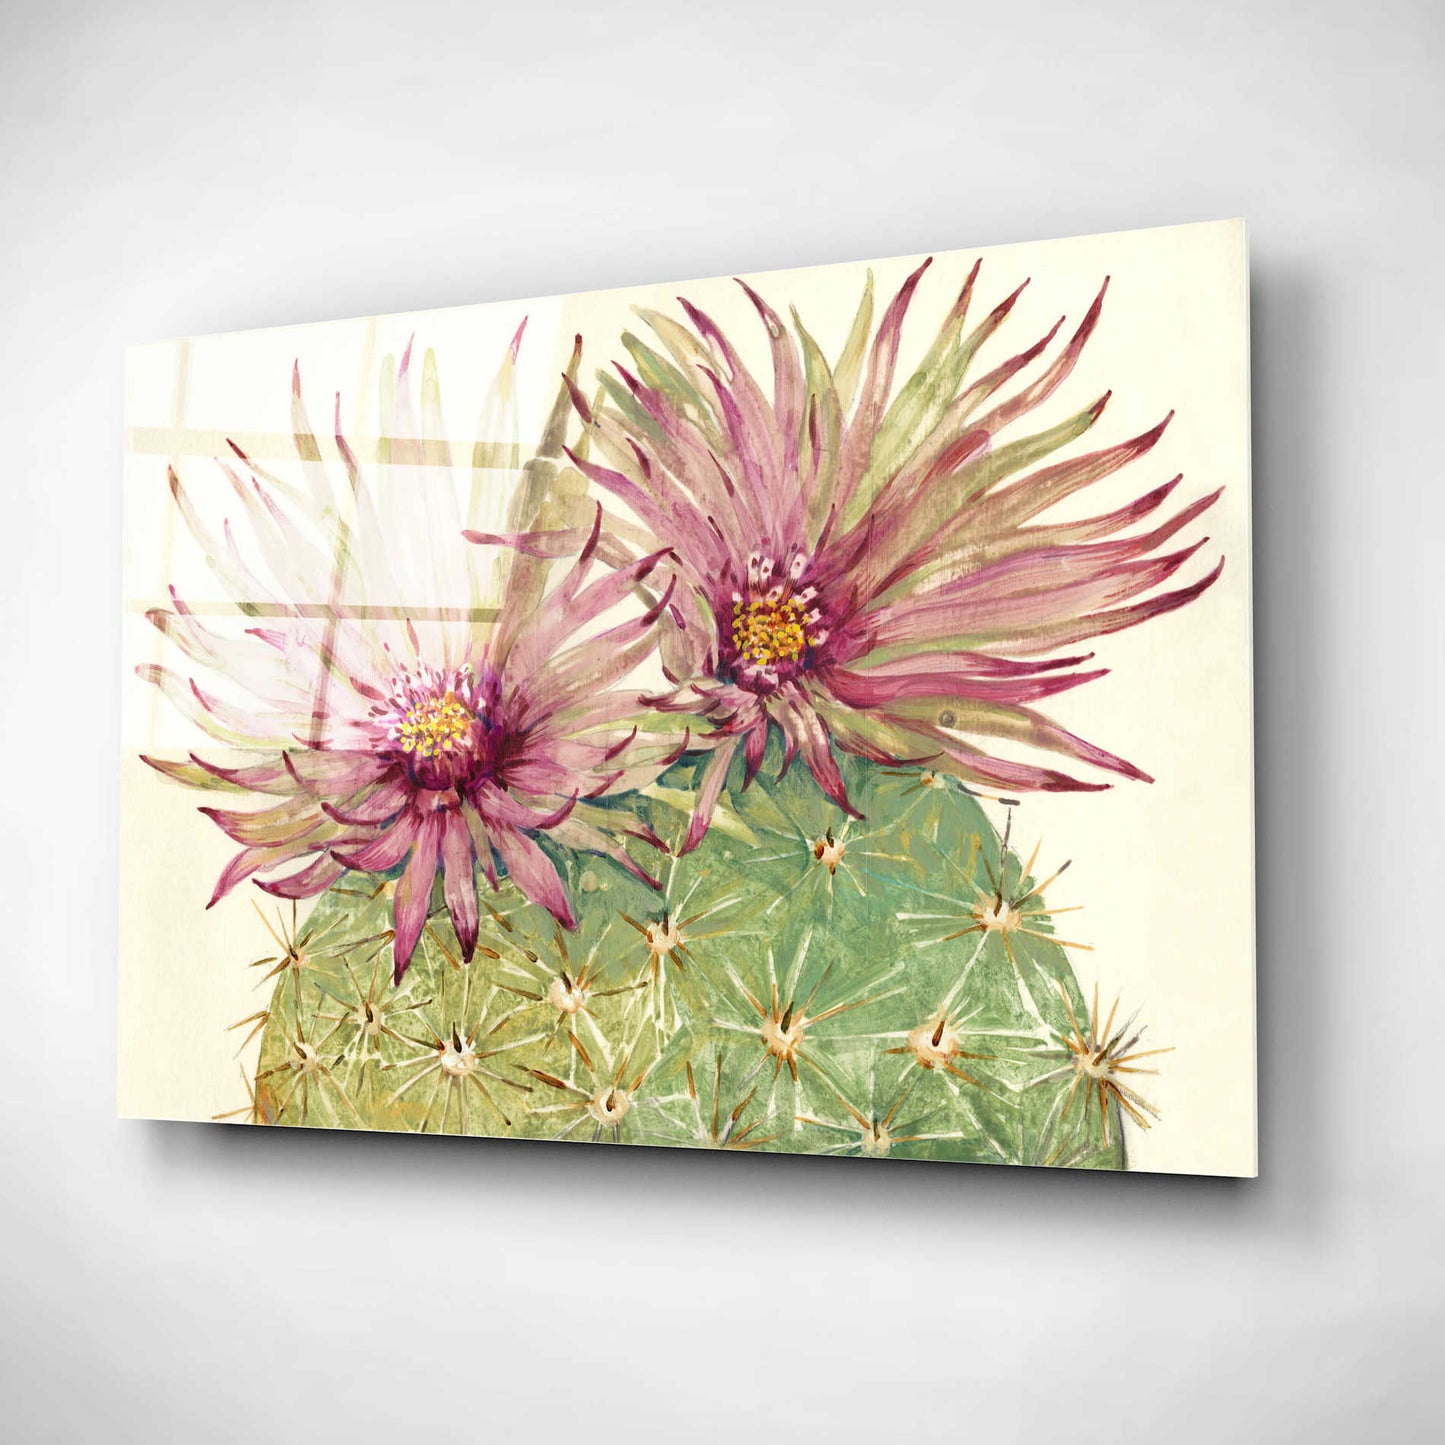 Epic Art 'Cactus Blossoms I' by Tim O'Toole, Acrylic Glass Wall Art,24x16